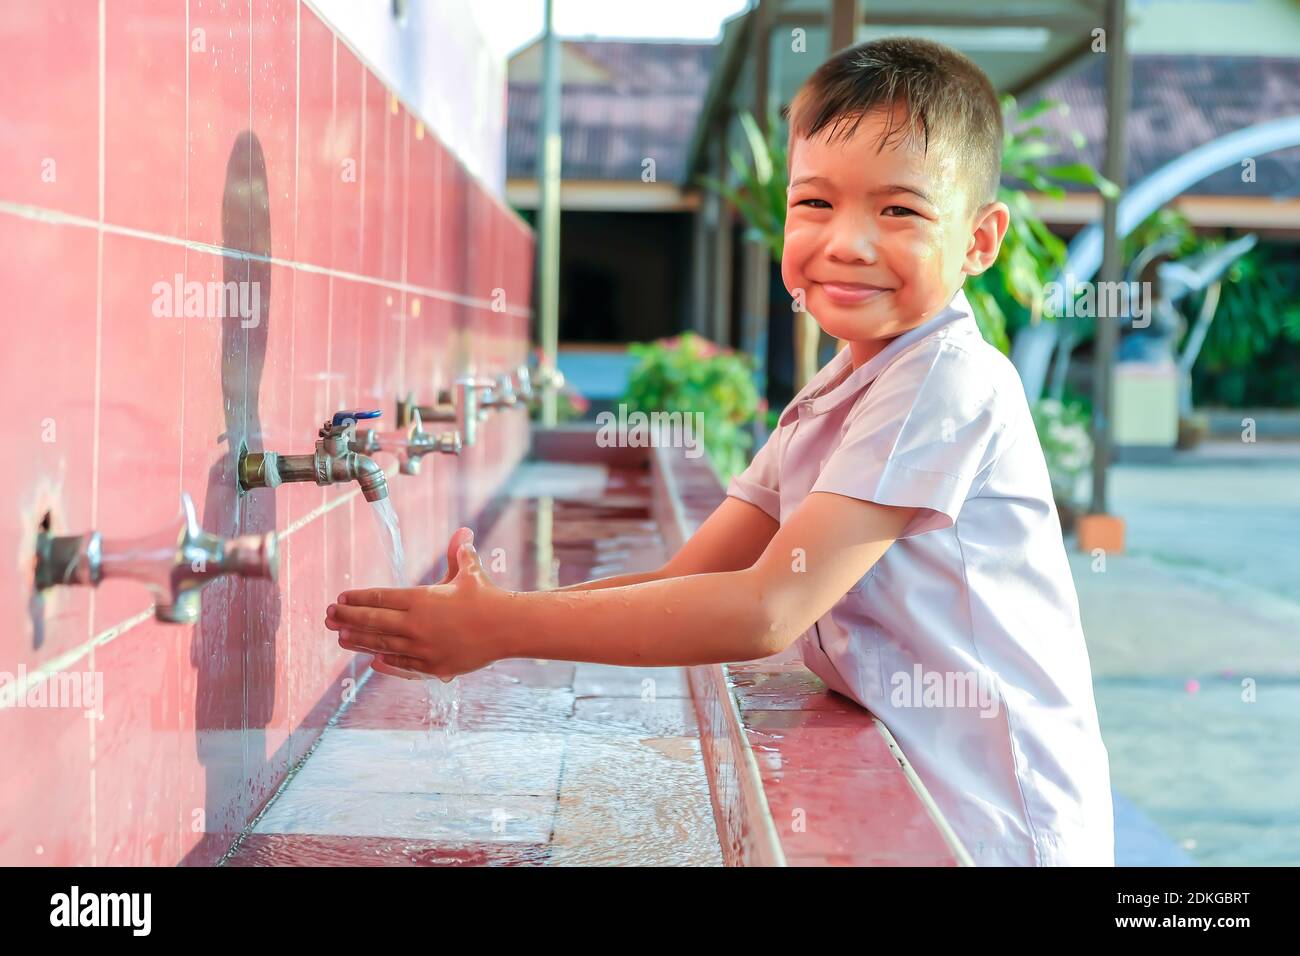 Soft focus, Health care and kid concept. Asian child boy washing his hands before eating food and after play the toys at the washing bowl. A boy aged of 5-6 years old. Stock Photo